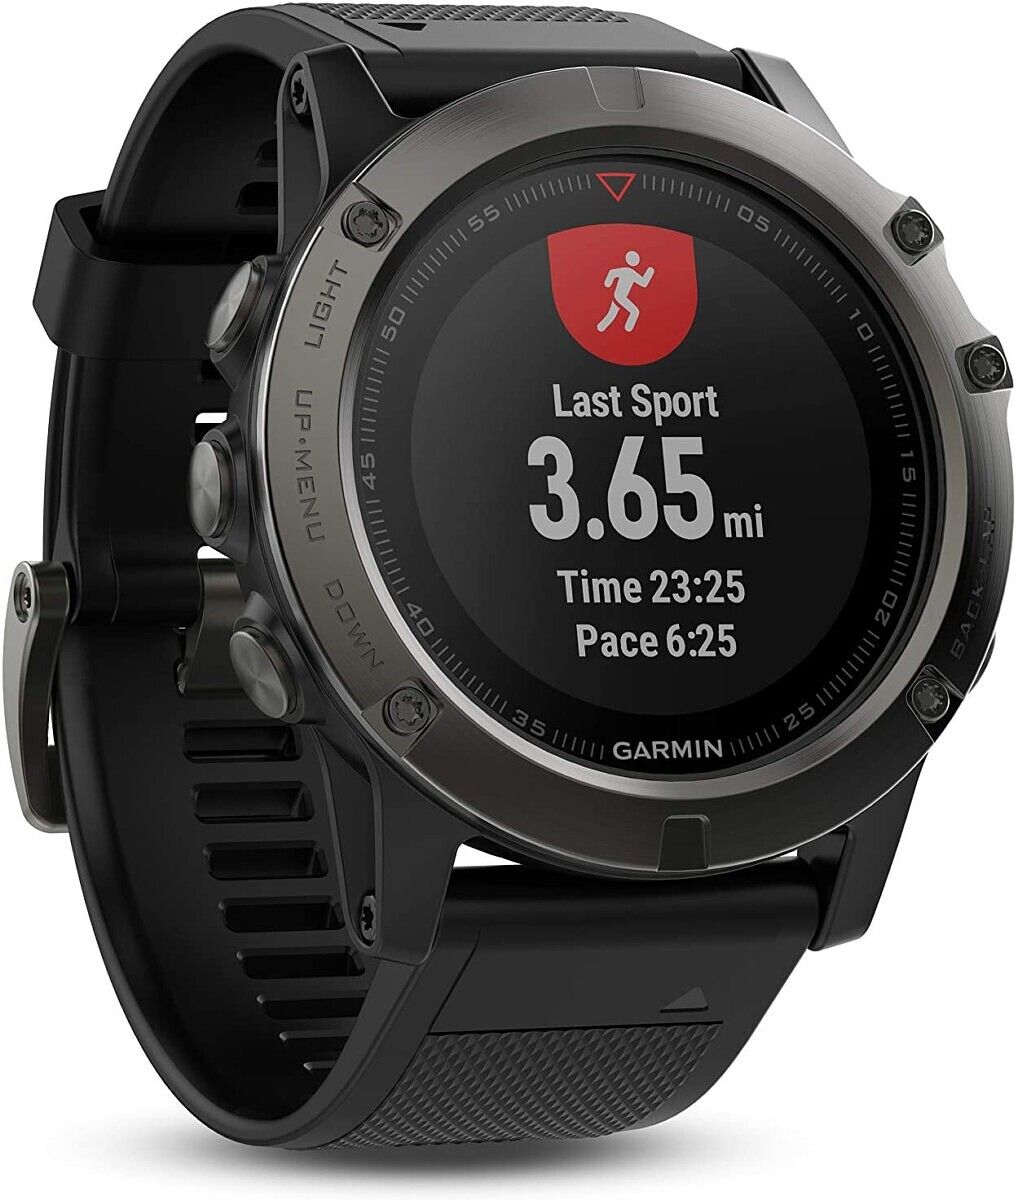 Smartwatches are just as varied as smartphones are, which makes picking the right one for your needs sometimes difficult. The Garmin Fenix 5X Sapphire is a fitness-focused smartwatch that'll automatically track the most common workouts, and you can get it for $410 at Amazon.